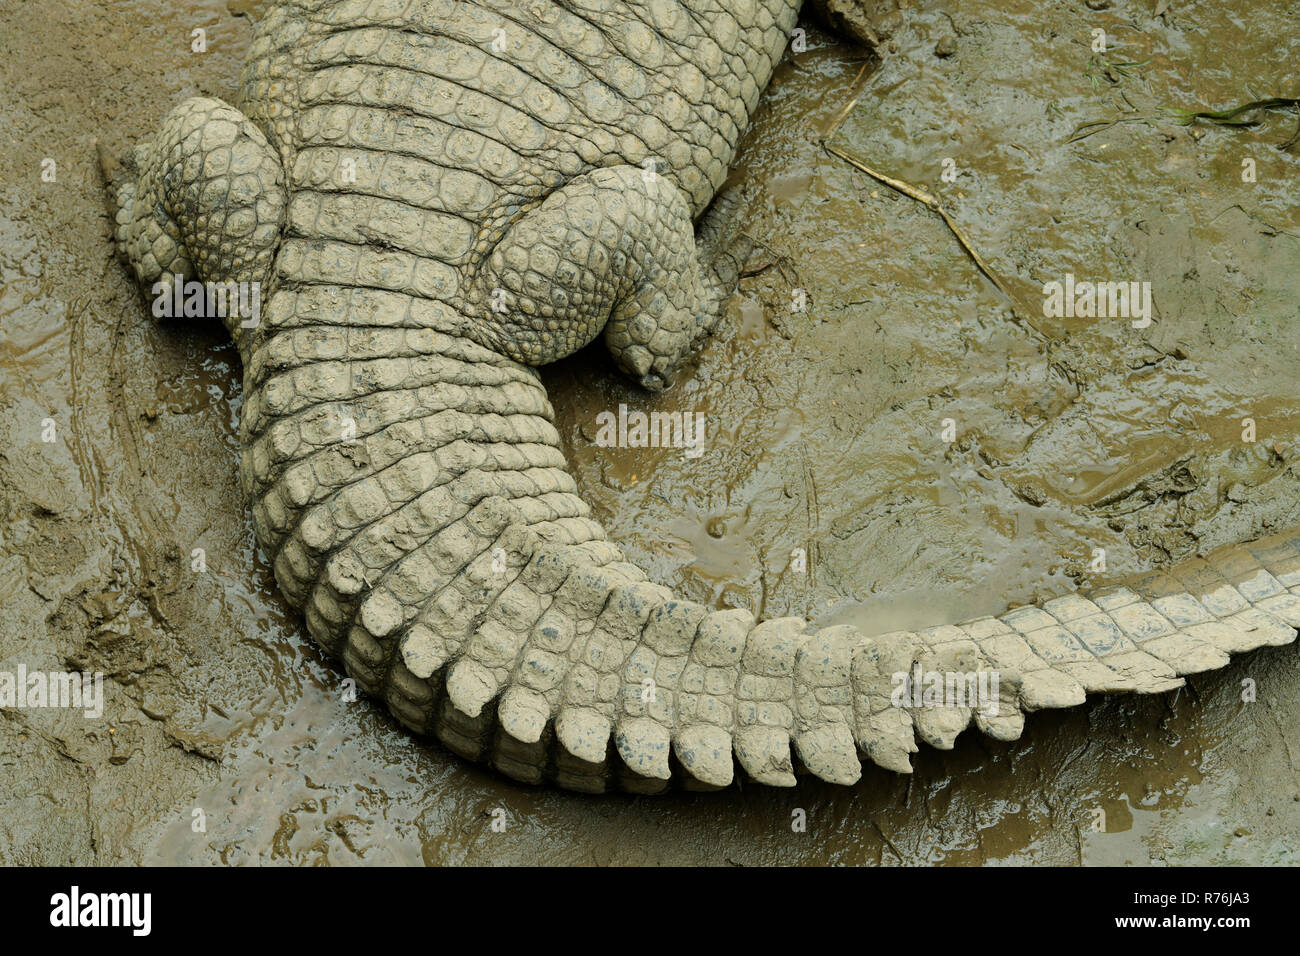 Nile Crocodile, Crocodylus niloticus, lying with tail in curve showing the pattern and arrangement of scales on the animal's skin Stock Photo